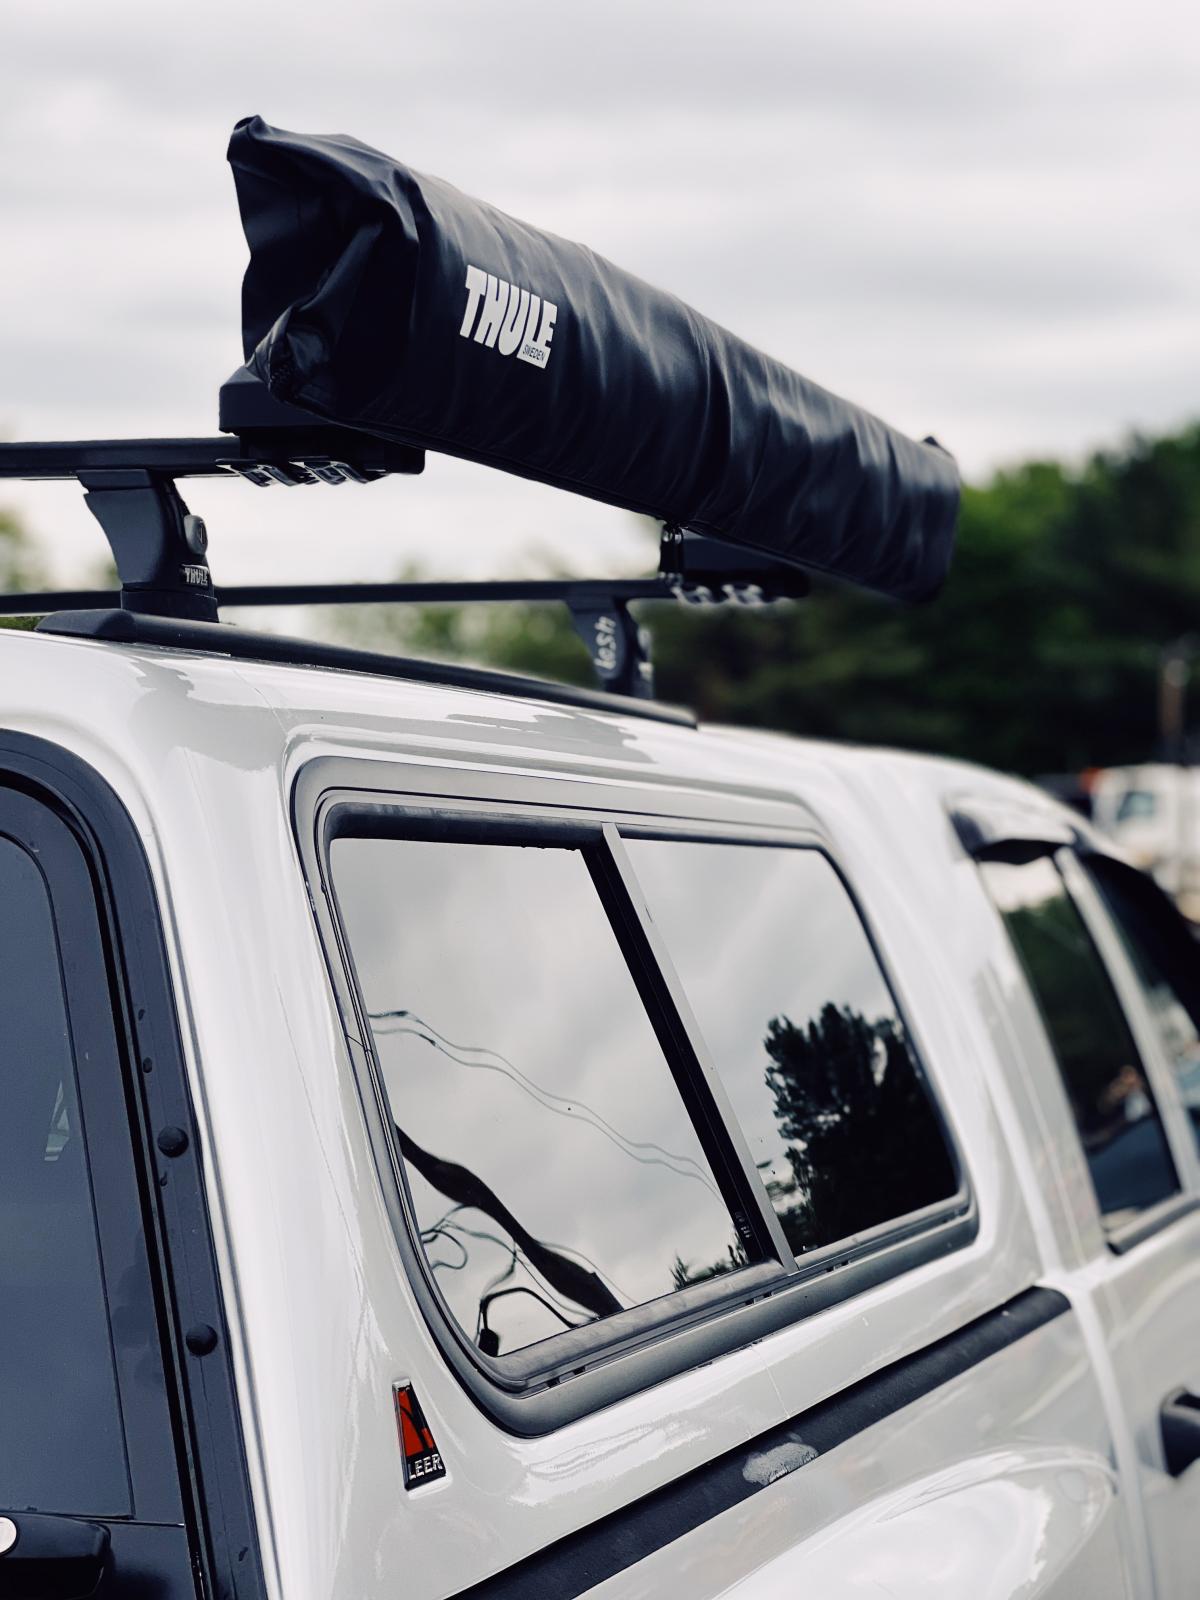 https://www.capworld.com/sites/default/files/styles/extra_large/public/images/Thule%20Roof%20Rack%20with%20Awning.jpg?itok=dq7rthFz